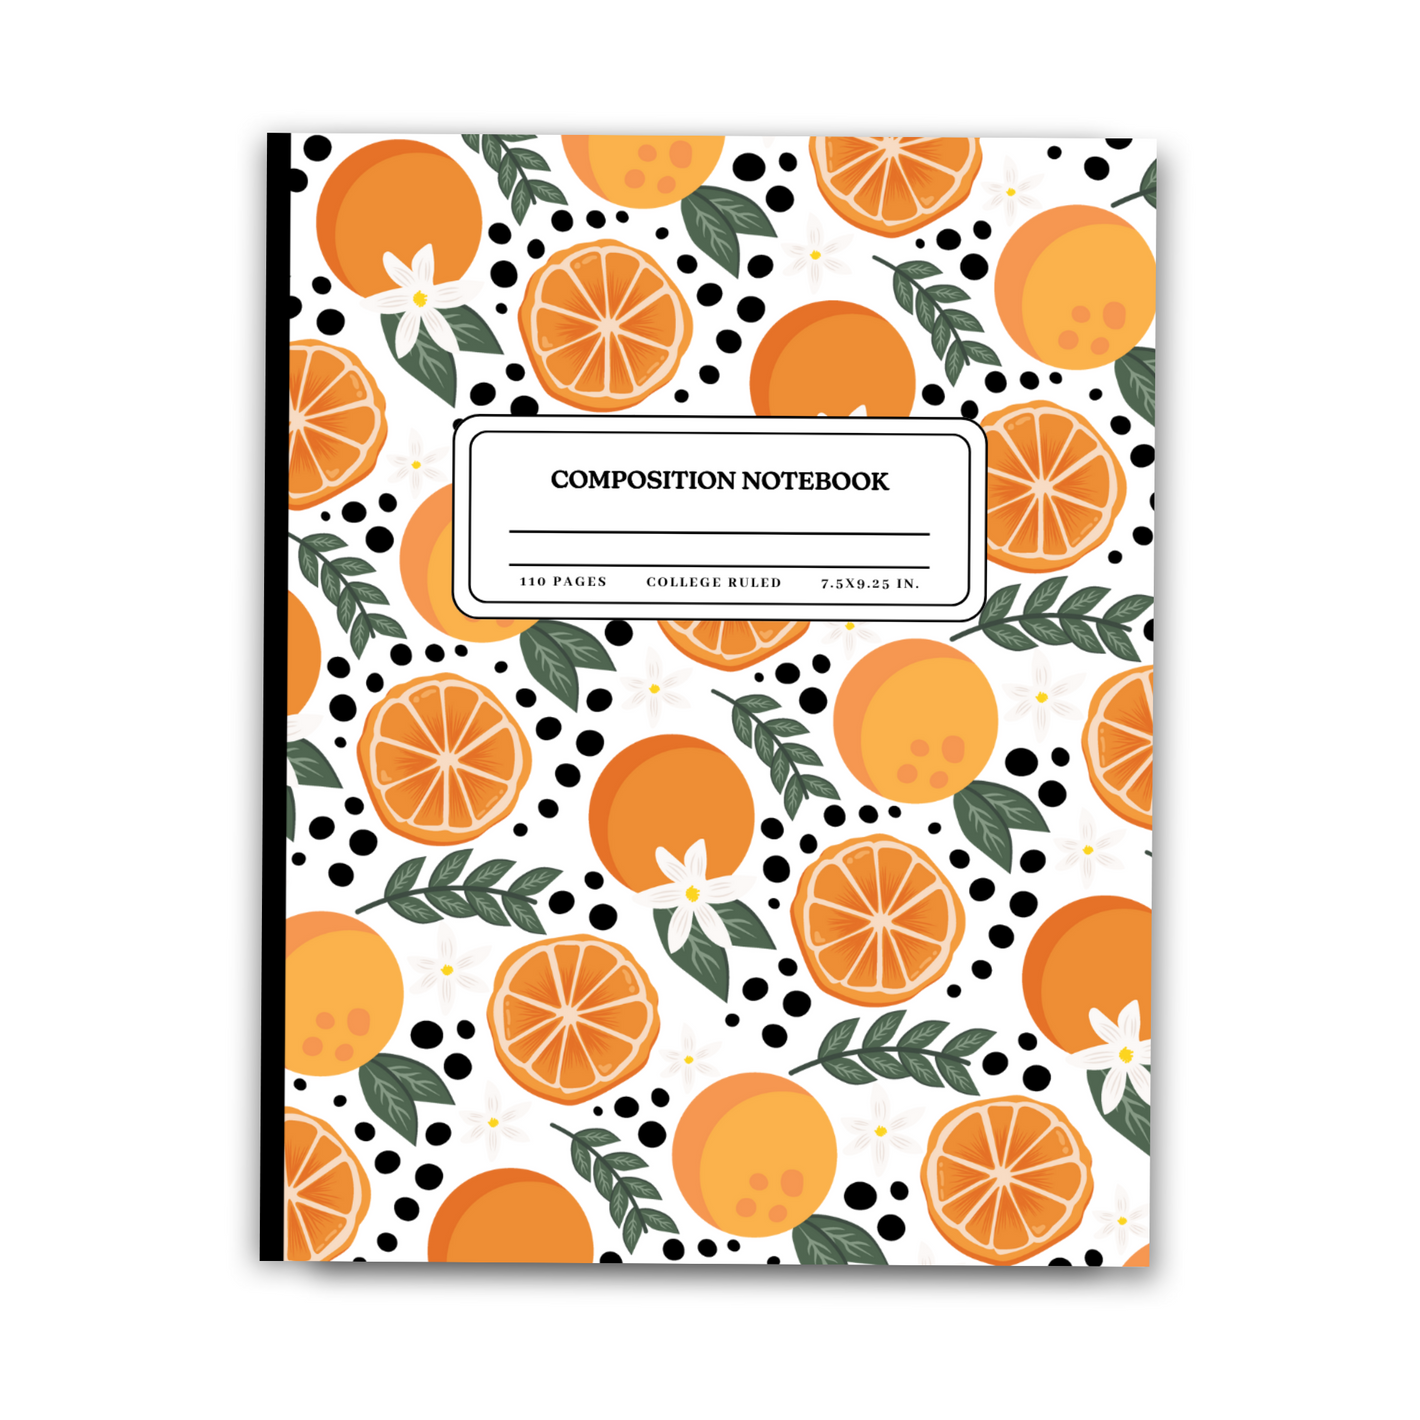 Composition notebook for school study notes, planning and documenting important events or tasks